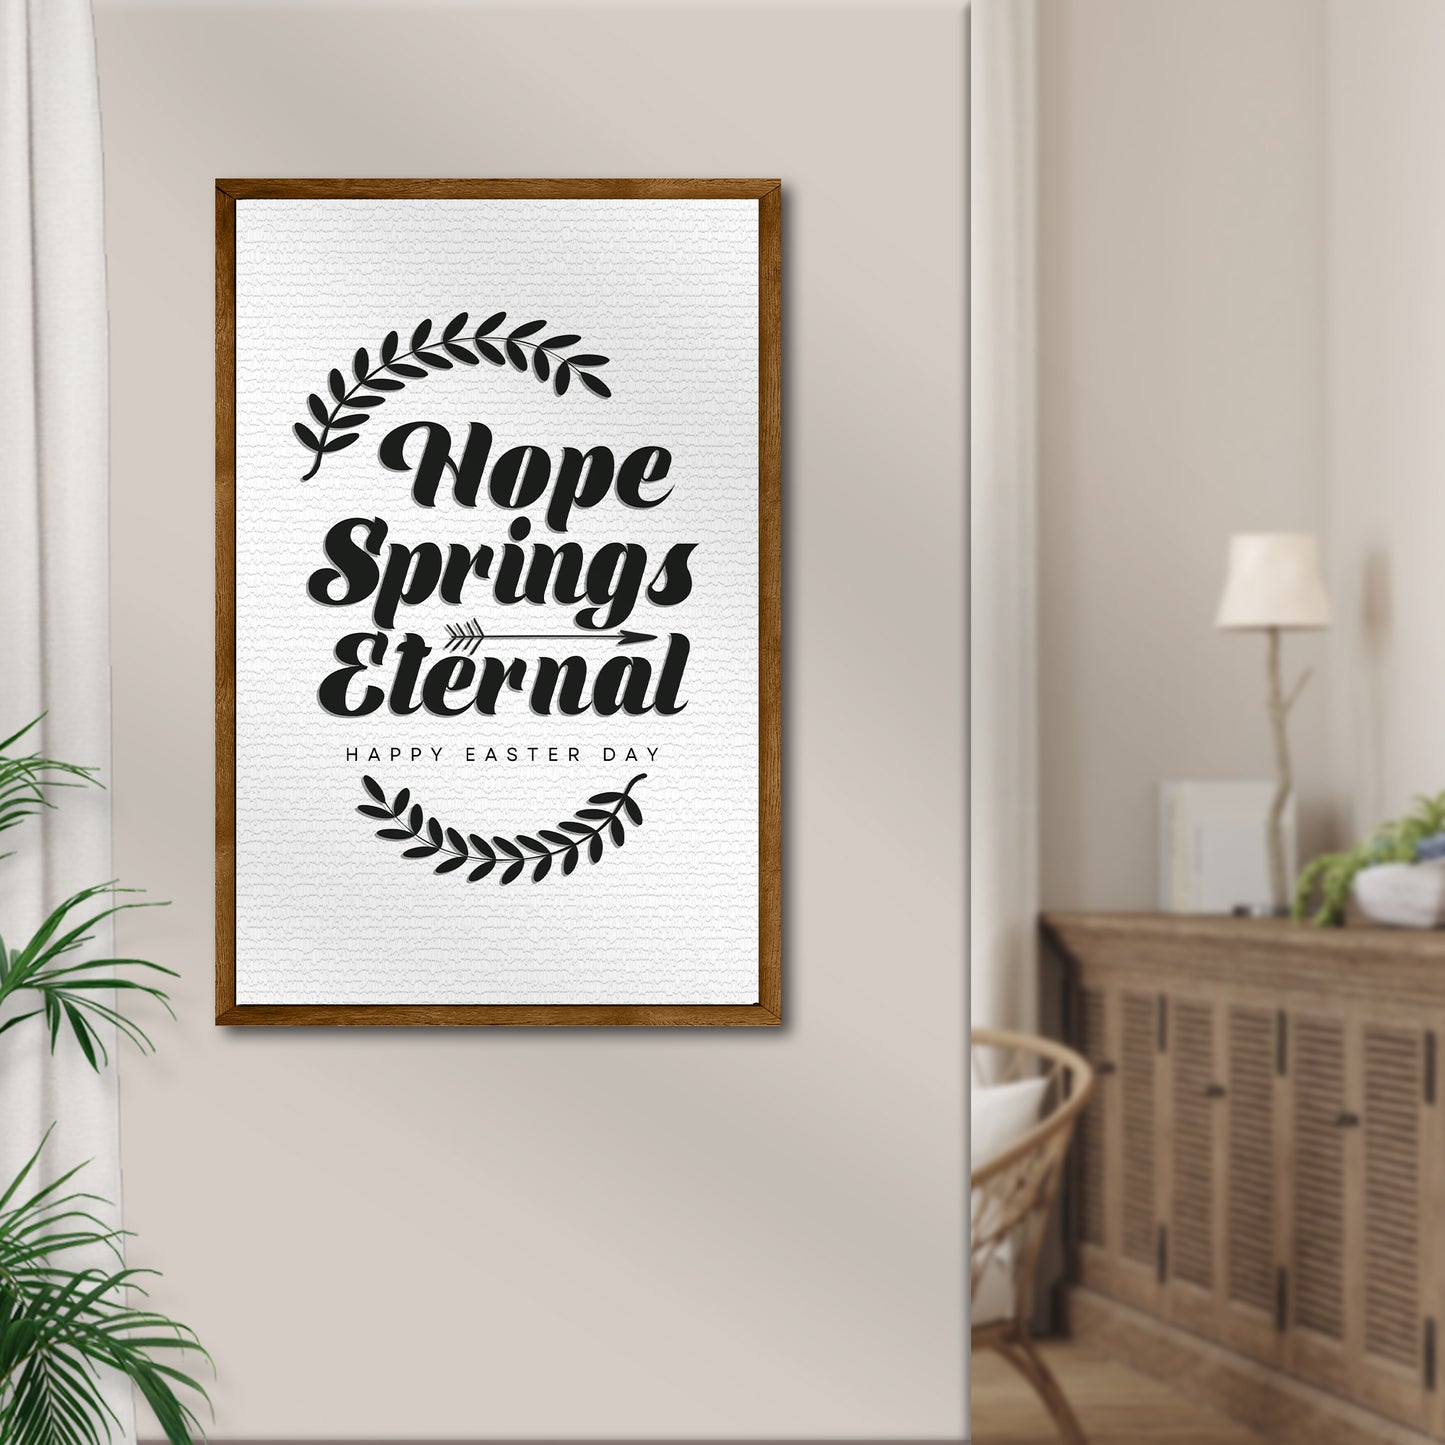 Hope Springs Eternal Sign II Style 1 - Image by Tailored Canvases